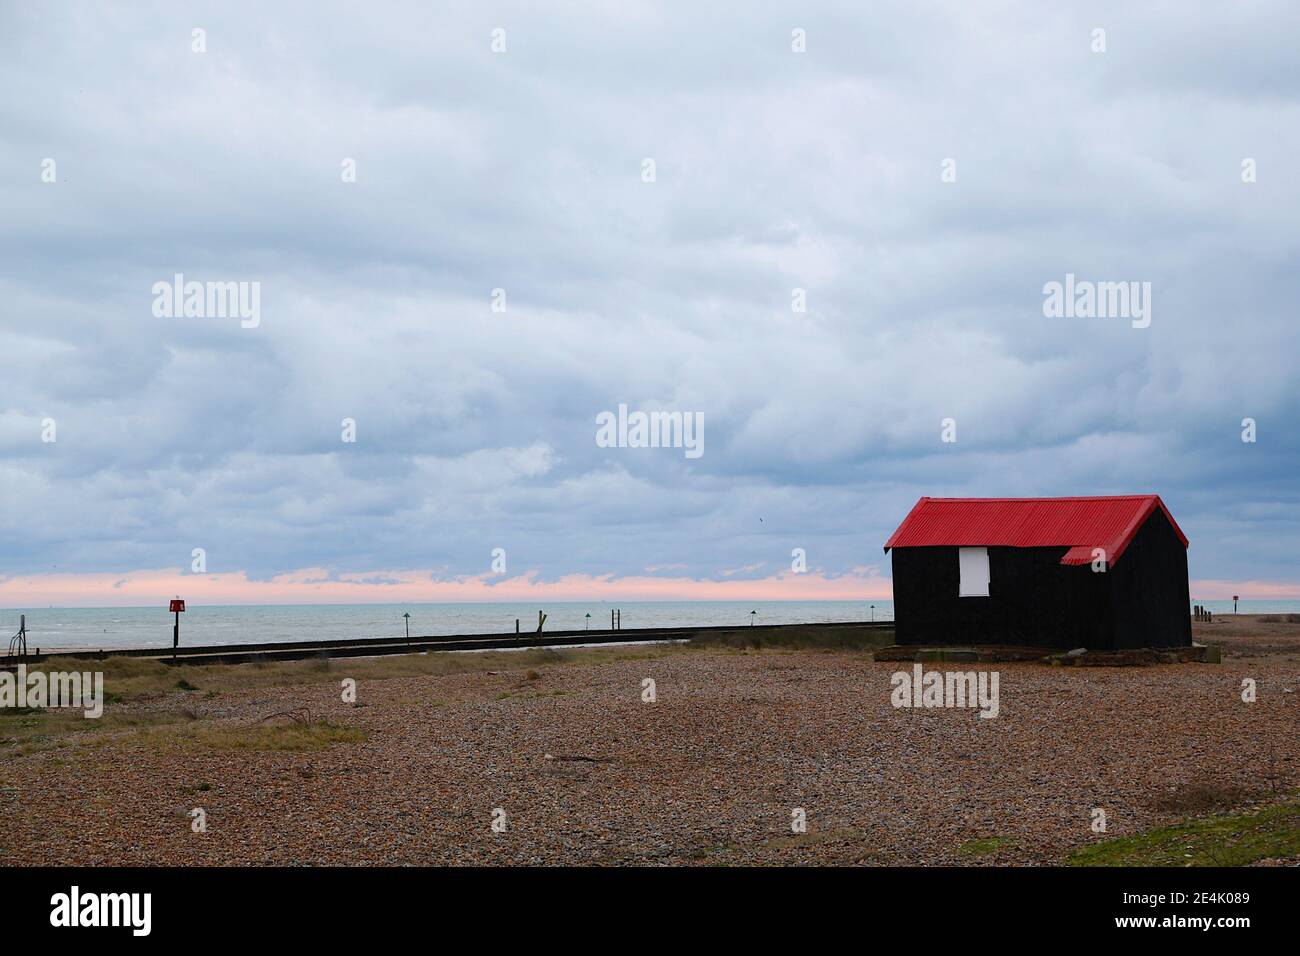 Rye, East Sussex, UK. 24 Jan, 2021. UK Weather: A cold and frosty start to the day in the Rye harbour nature reserve located near the ancient town off the south coast in East Sussex. Photo Credit: Paul Lawrenson/Alamy Live News Stock Photo